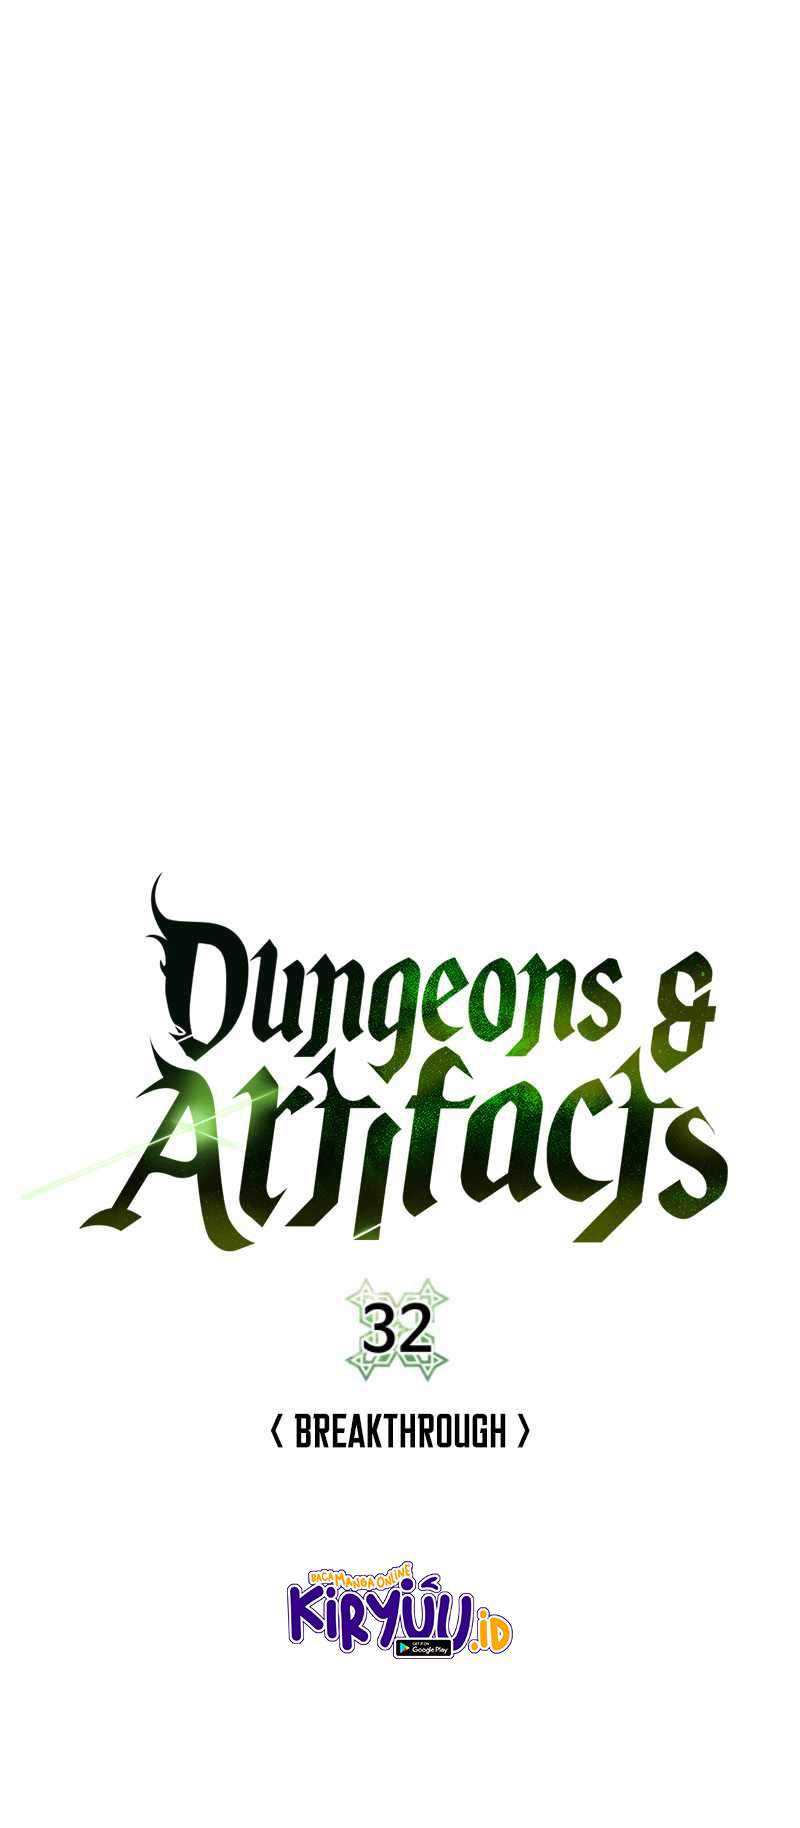 dungeons-artifacts Chapter chapter-32